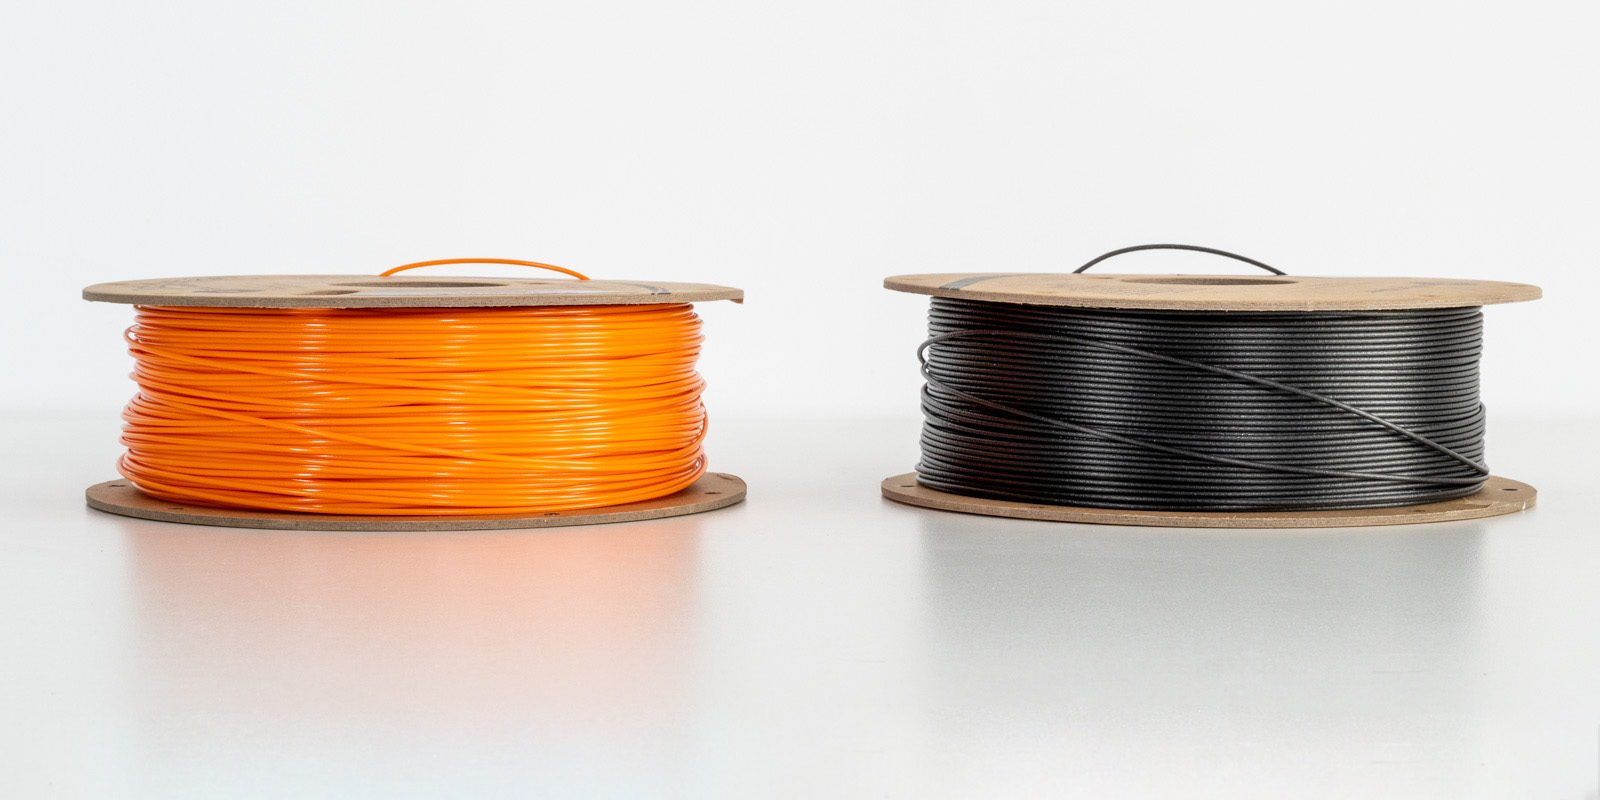 A side by side comparison of ASA vs ABS plastic filament for 3D printing.